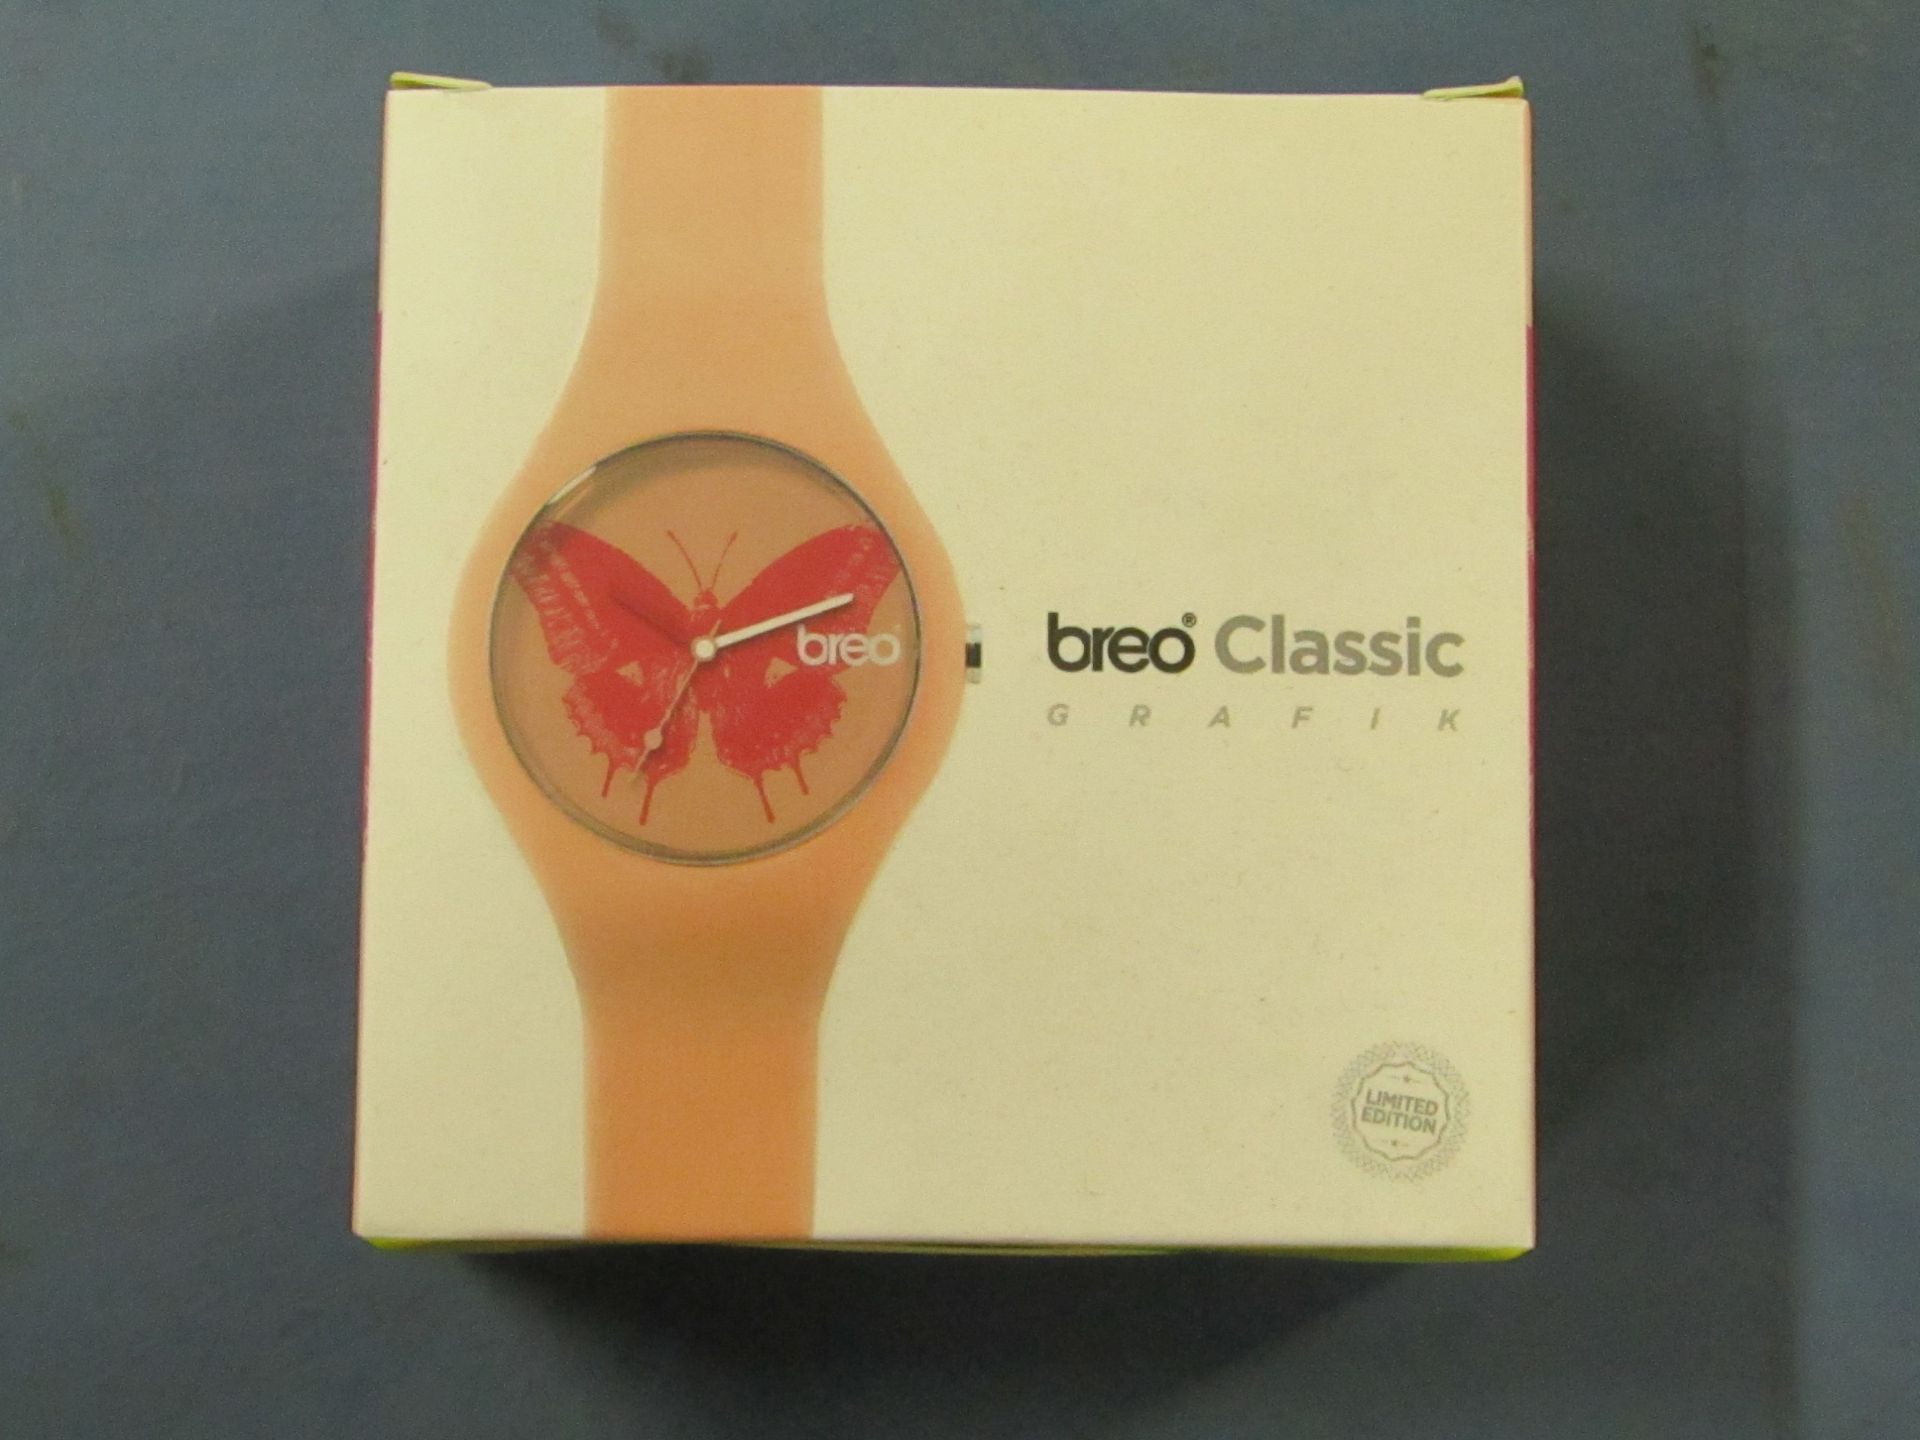 Breo classic grafik anologue wrist watch - pink butterfly. New & boxed.